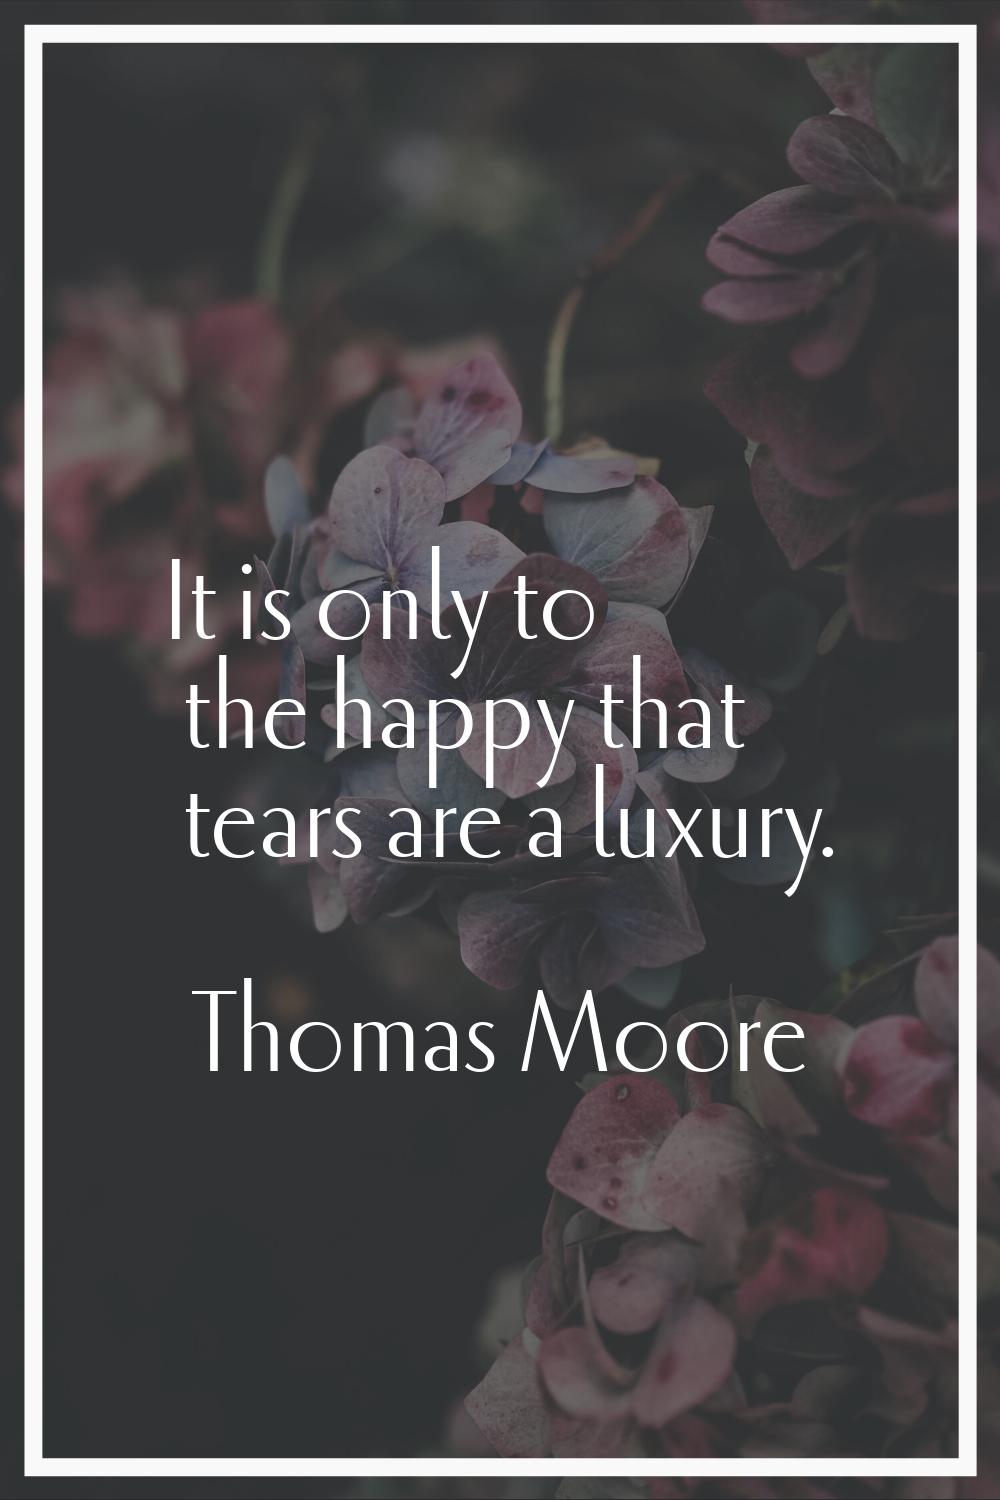 It is only to the happy that tears are a luxury.